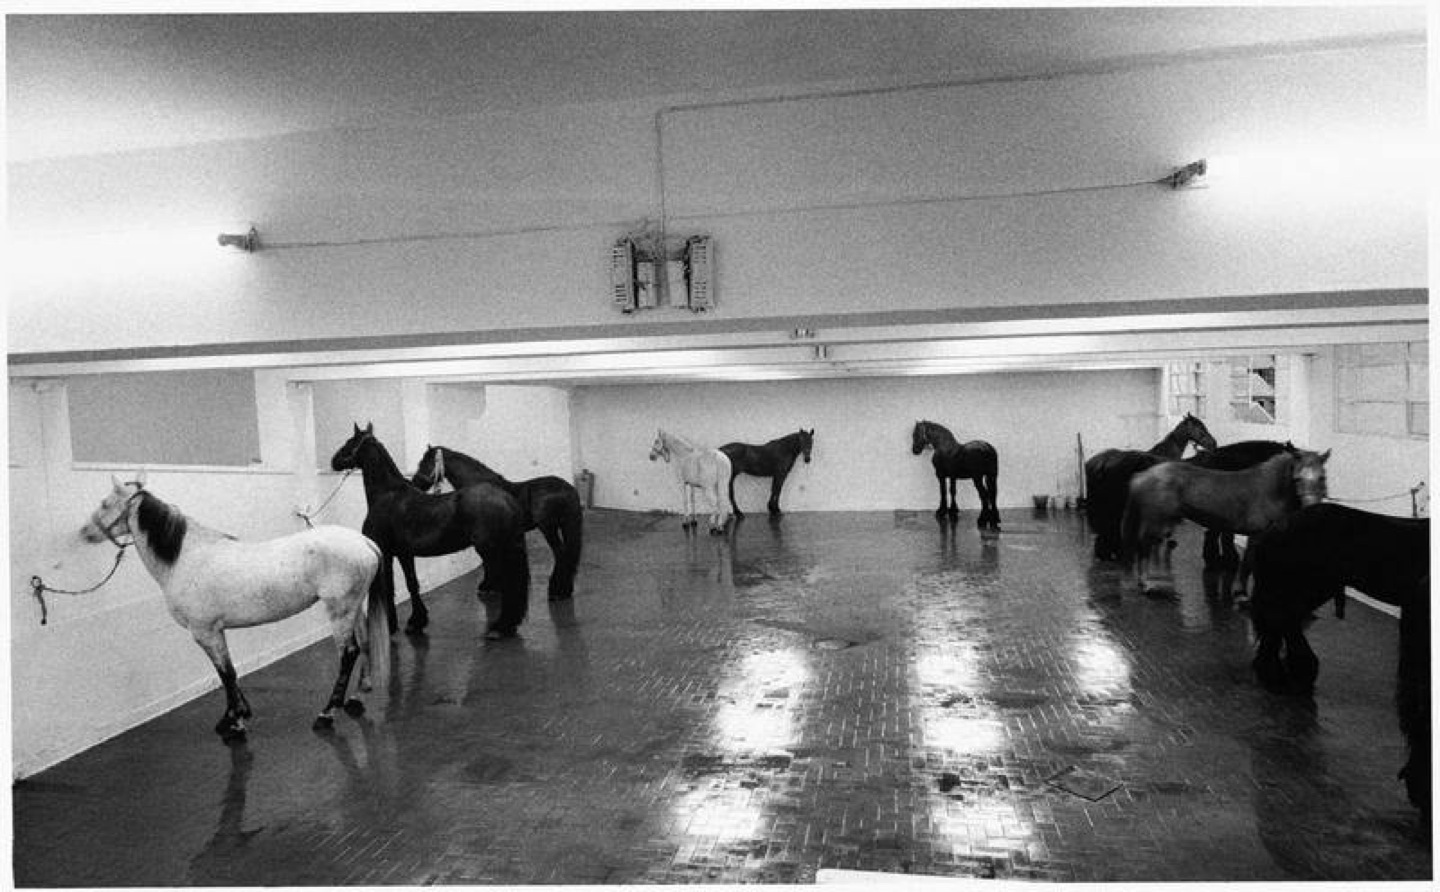 Untitled (12 horses), (1969) by Jannis Kounellis at the L’Attico Gallery, Rome